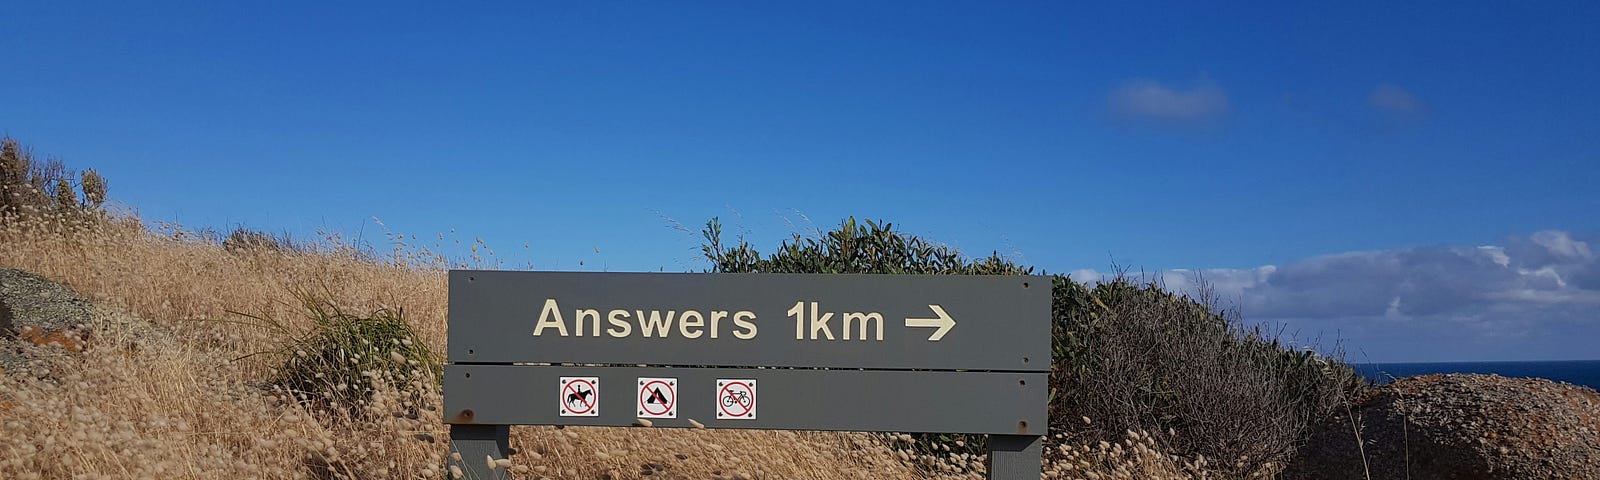 An image of a sign that points to answers